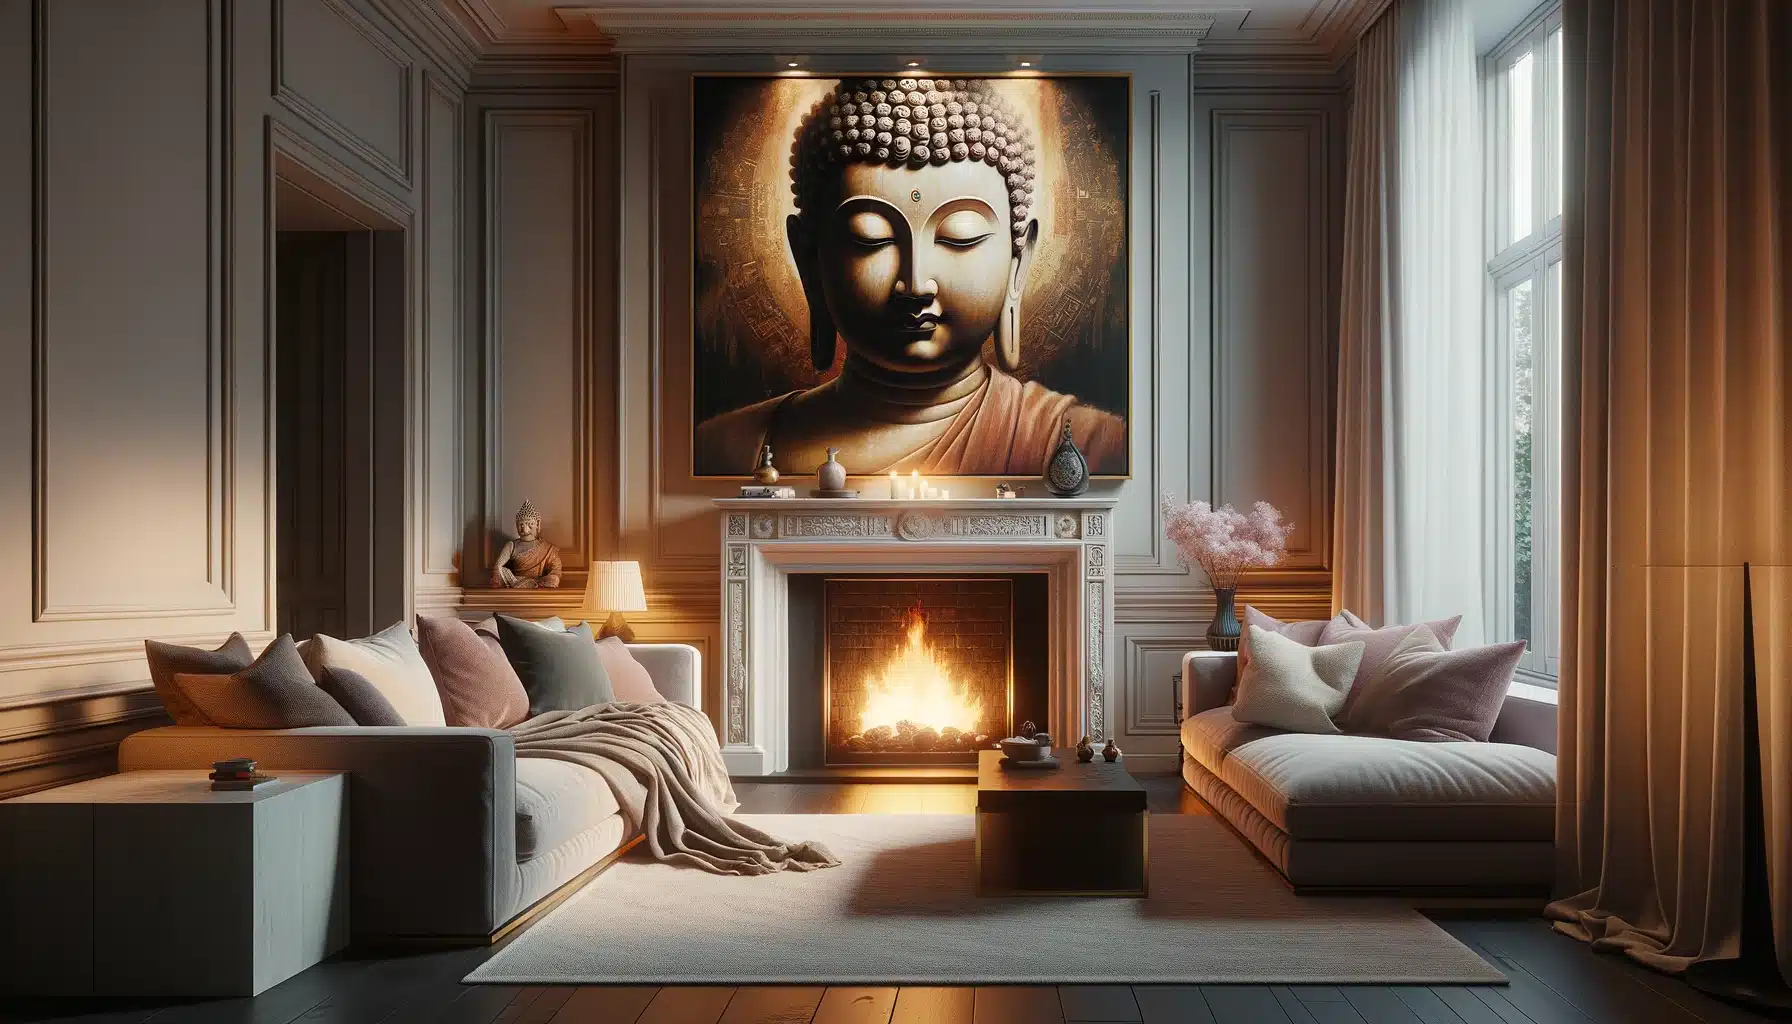 A comfortable living room with a singular focus on a large, beautifully rendered buddha painting hanging above the mantelpiece